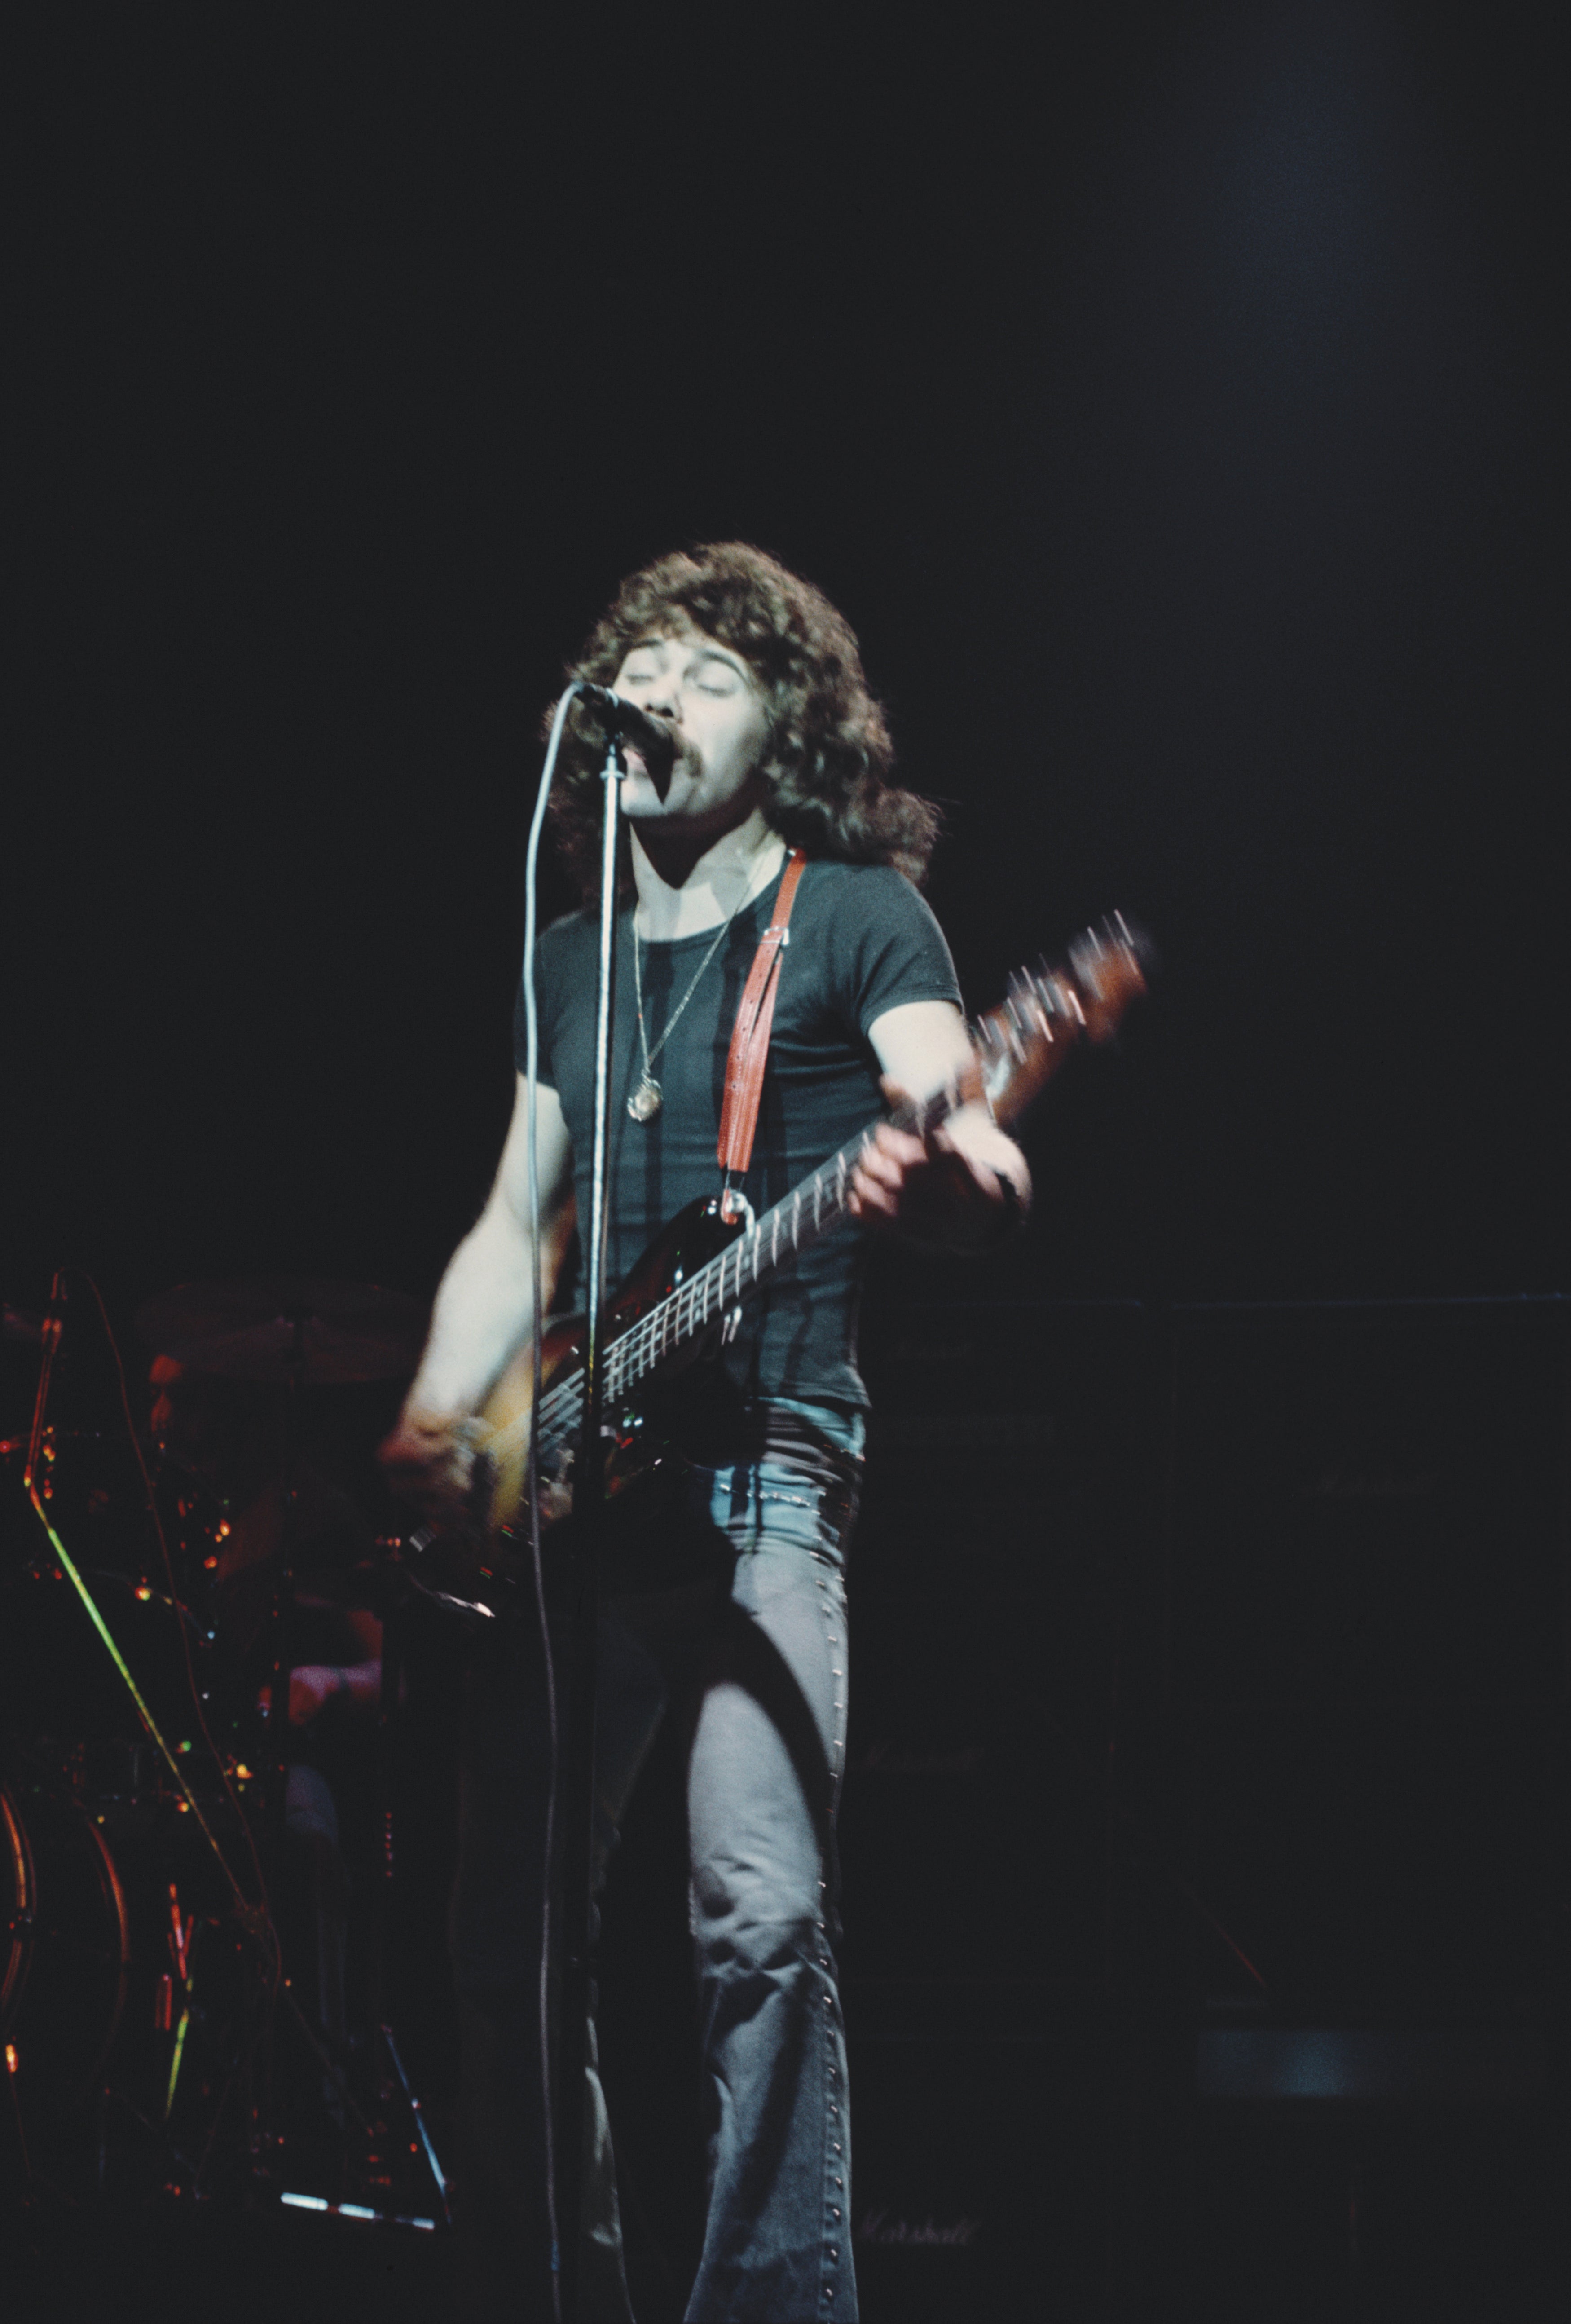 Lancaster performing at the Hammersmith Odeon in 1976